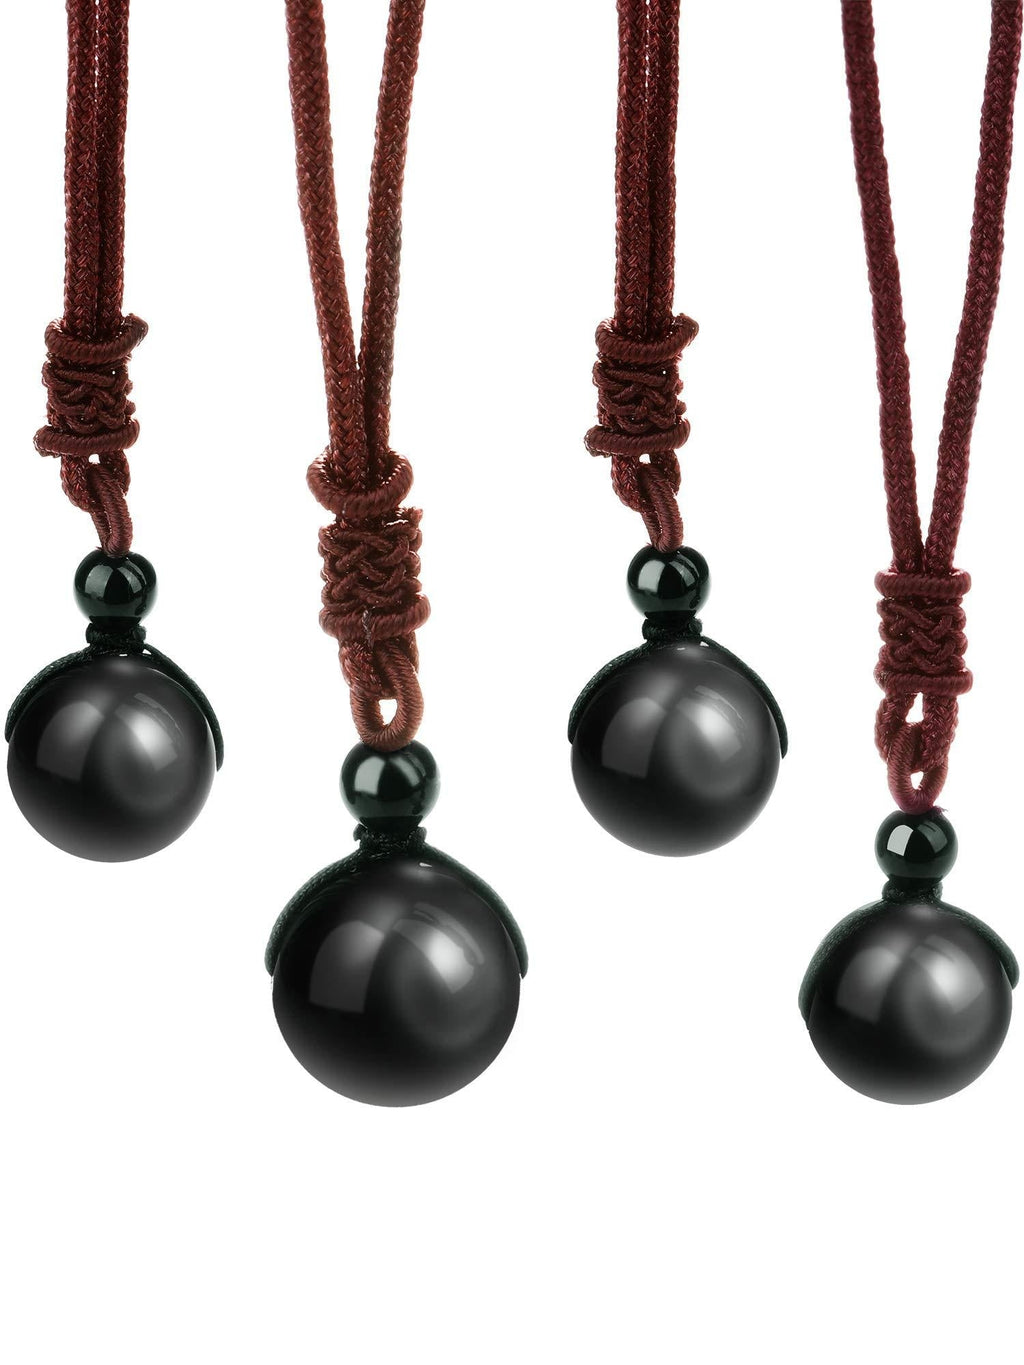 [Australia] - 4 Pack Natural Black Obsidian Necklace Double Rainbow Eye Beads Lucky Blessing Necklace, 16 mm 